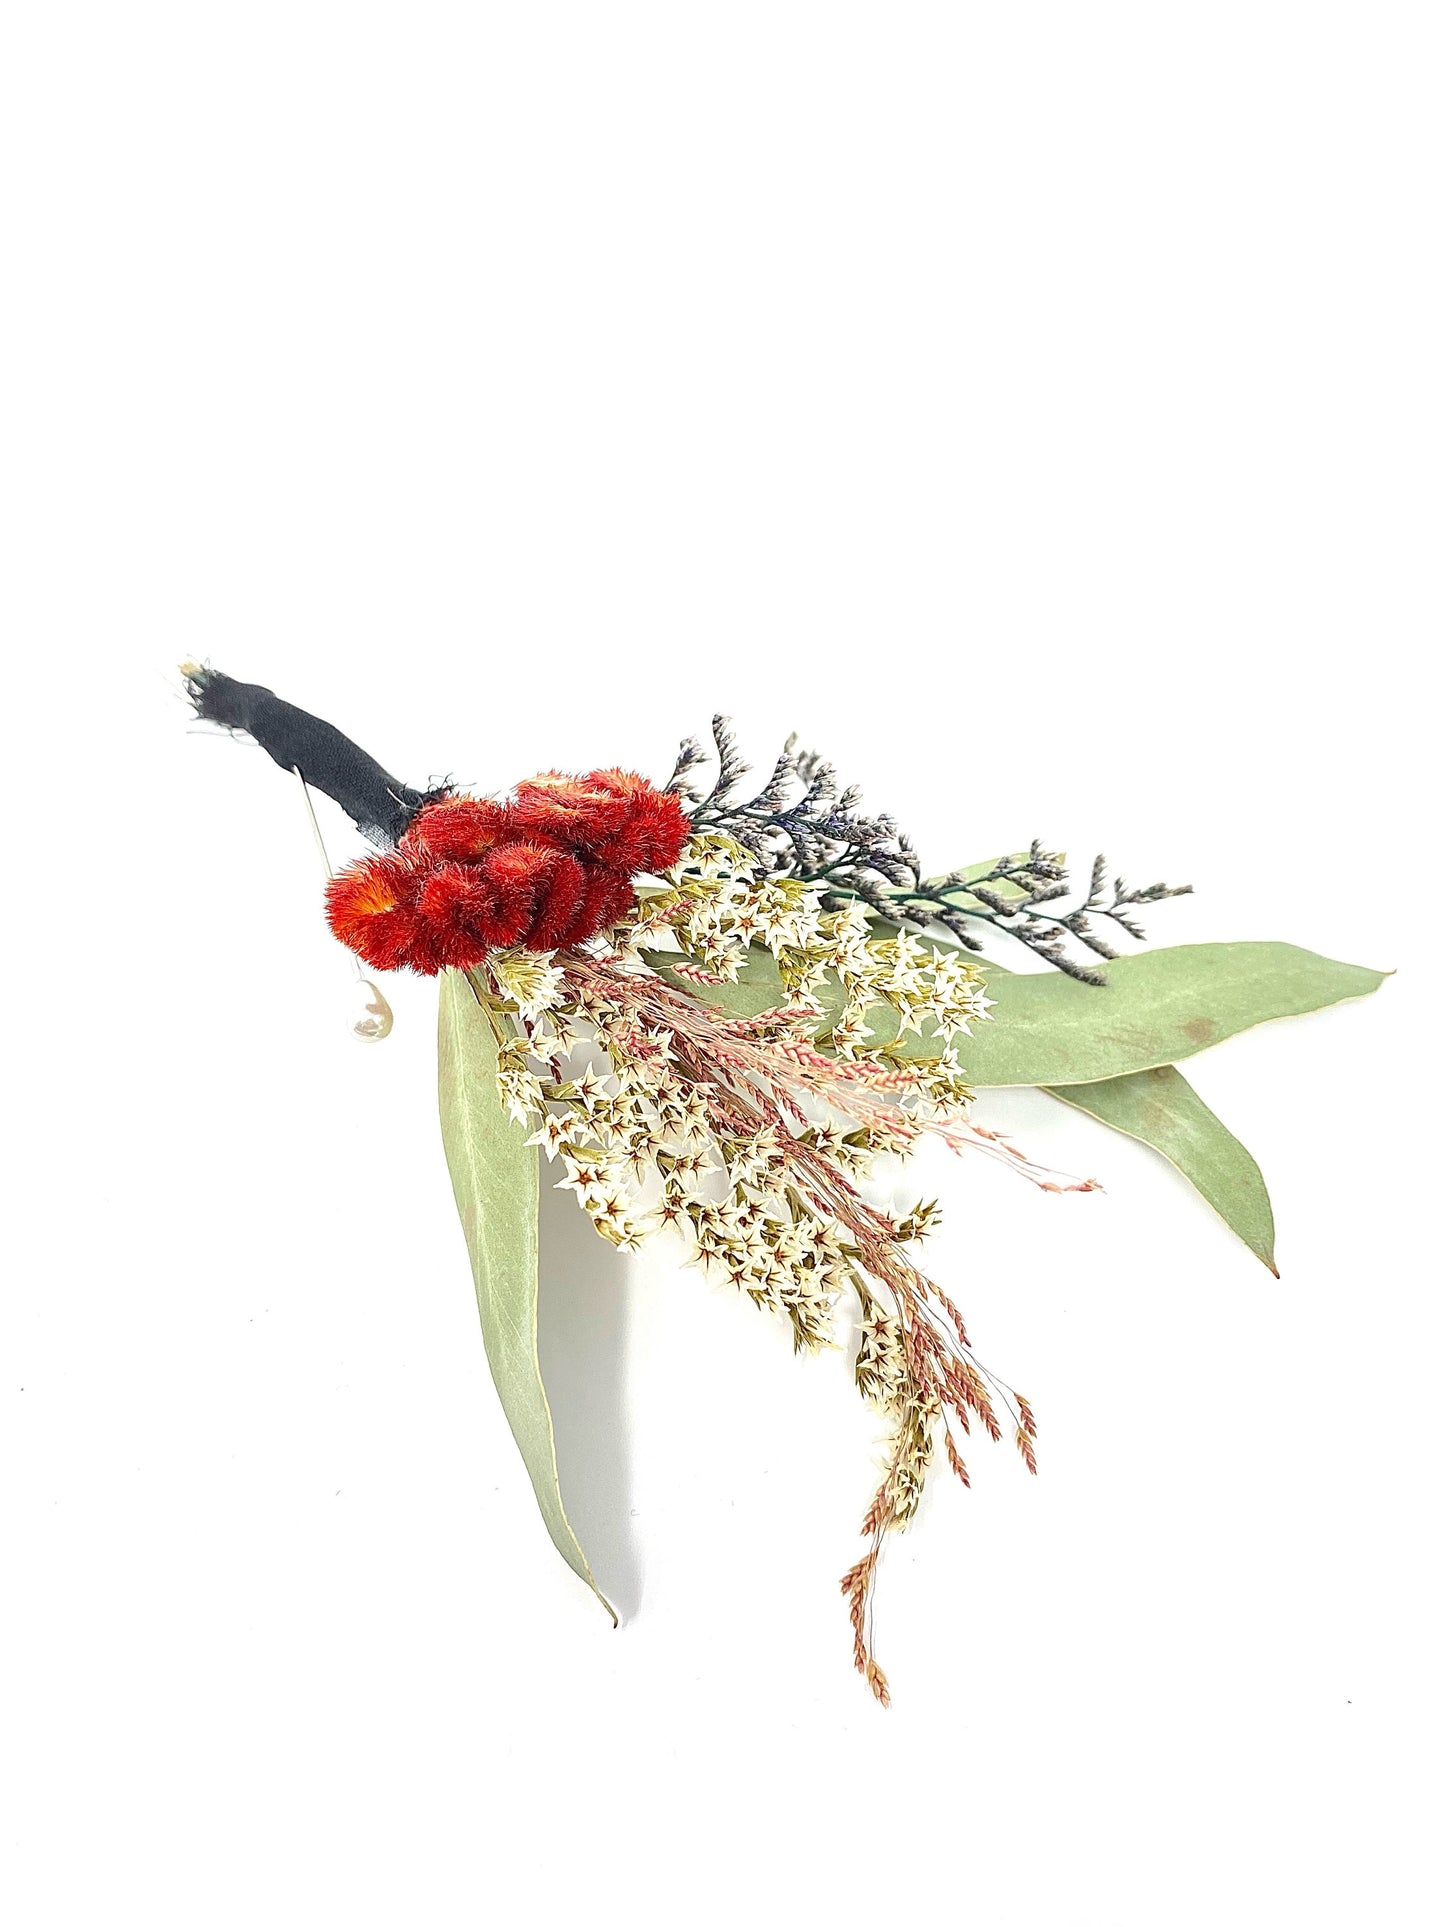 Boutonniere, Dried Flowers, Preserved Floral, Wedding Accessories, Coxcomb, Greenery, Caspia, Bridal